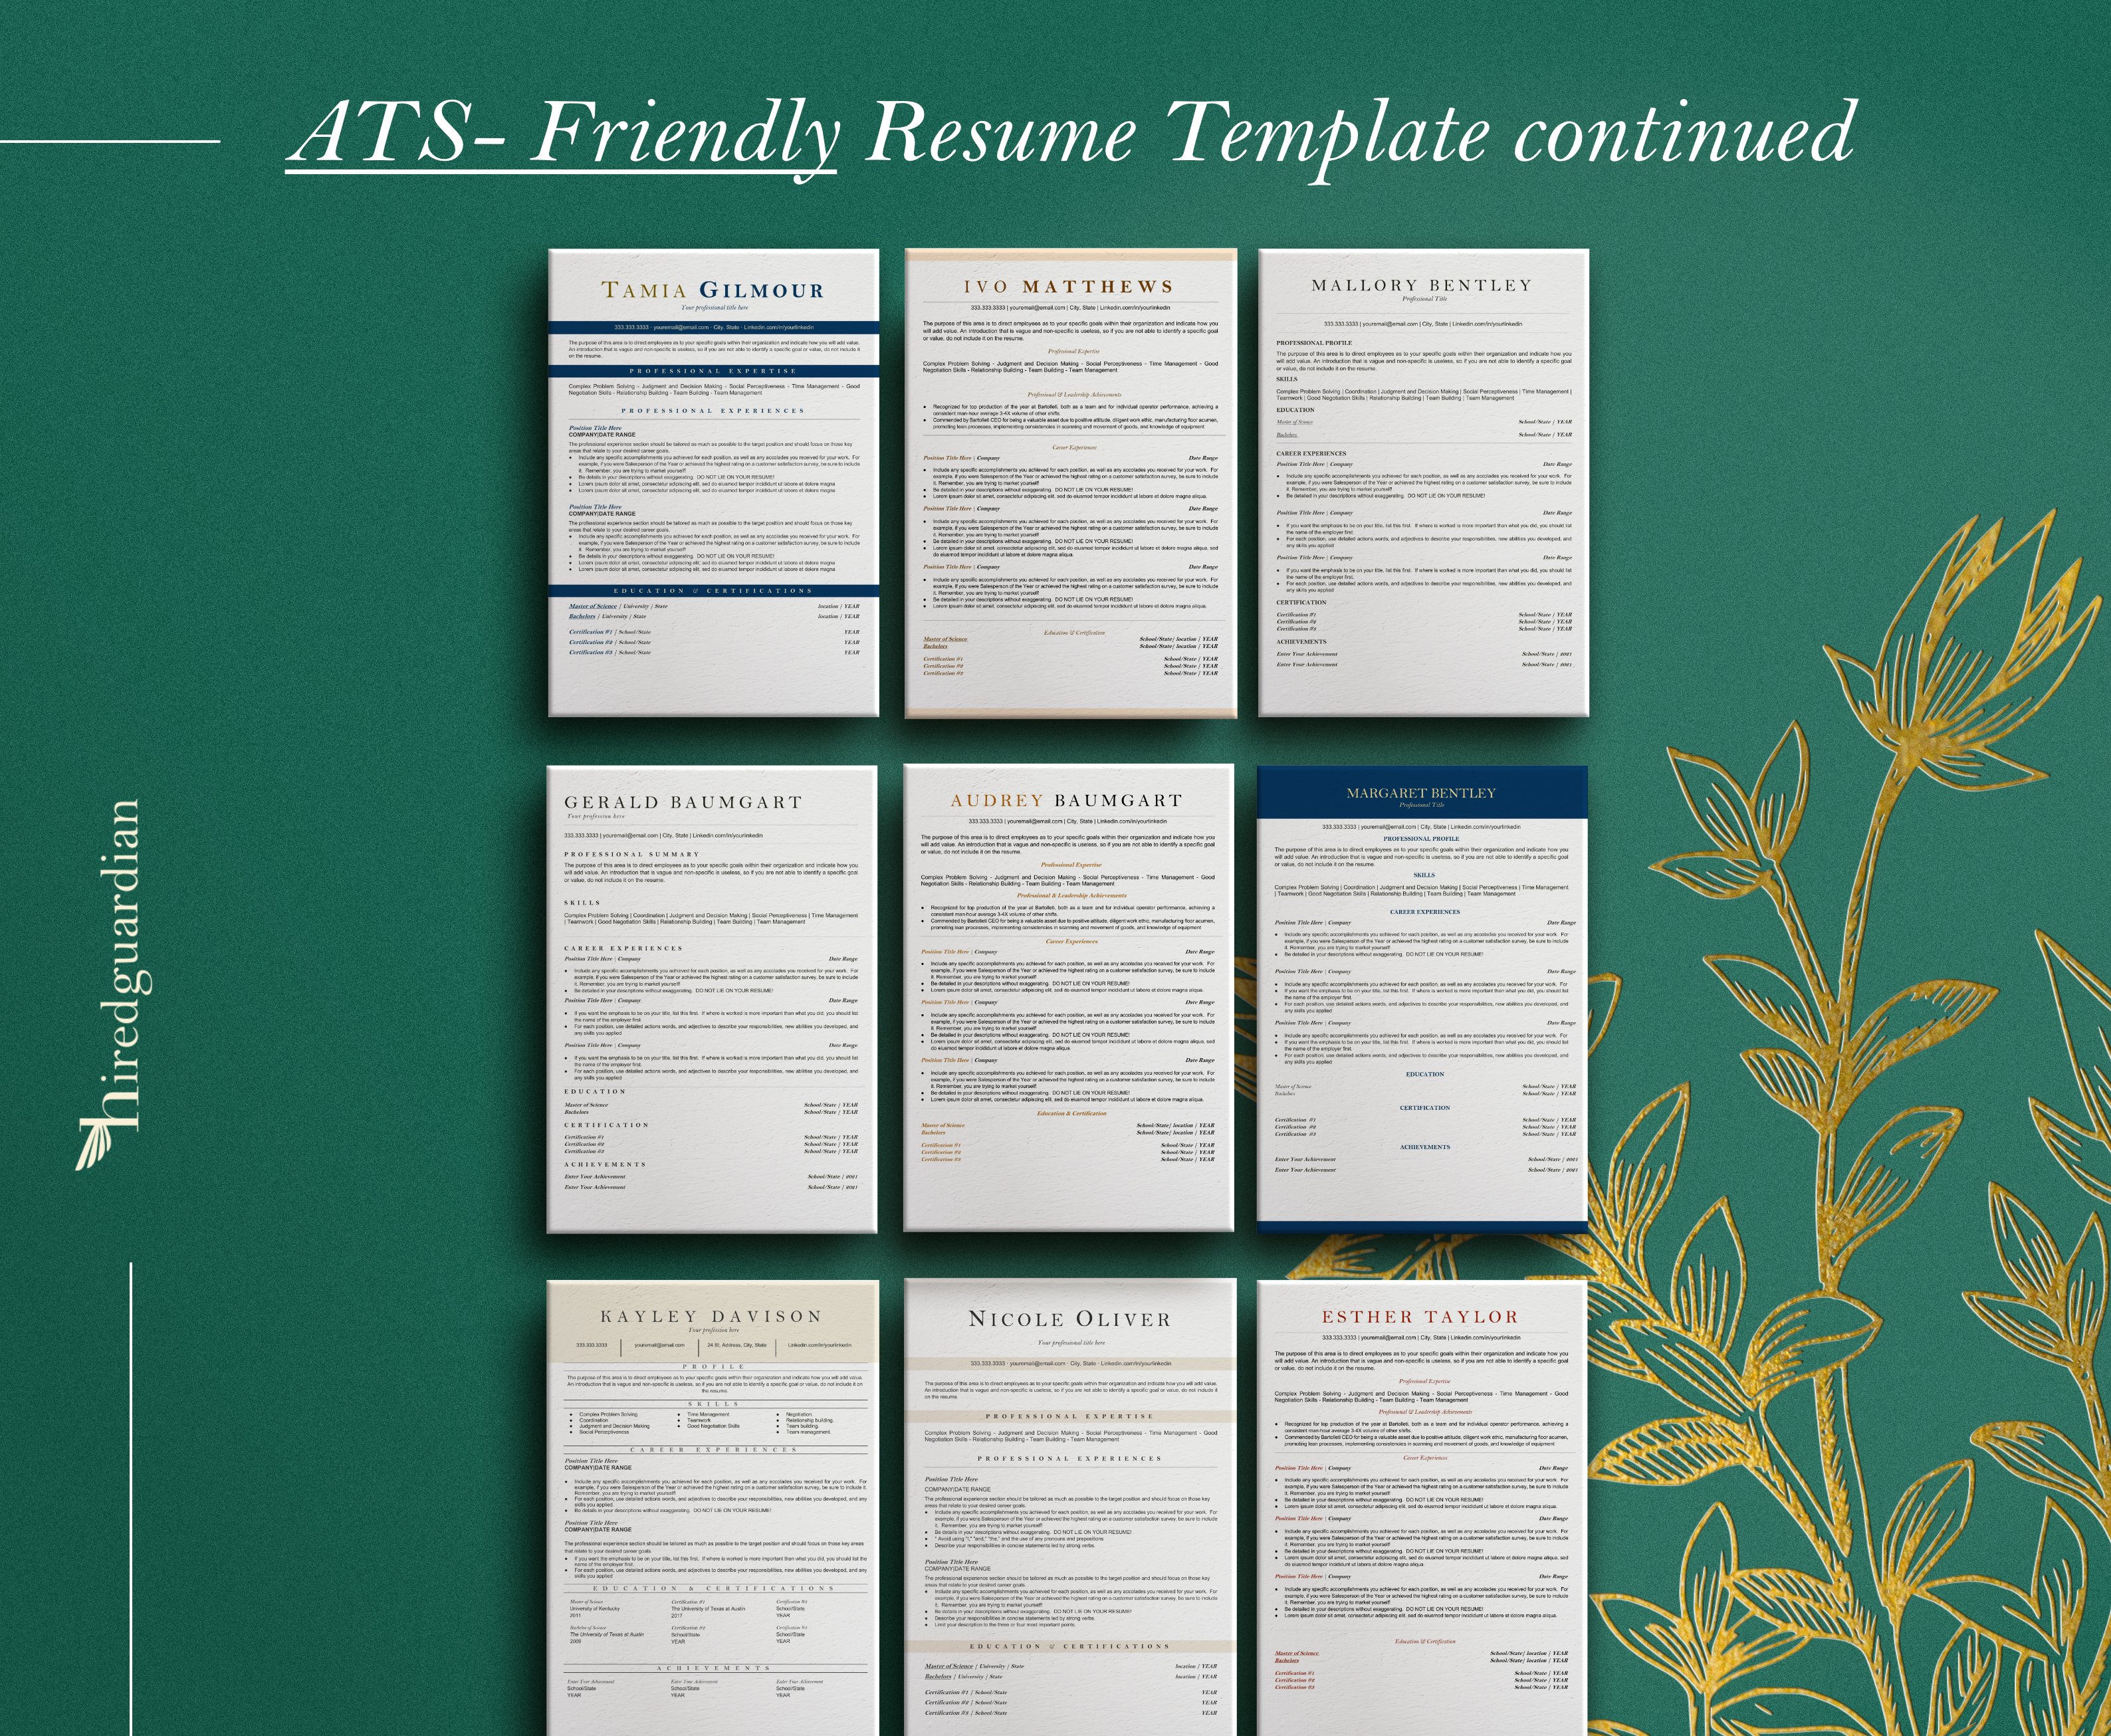 Bunch of different types of resumes on a green background.